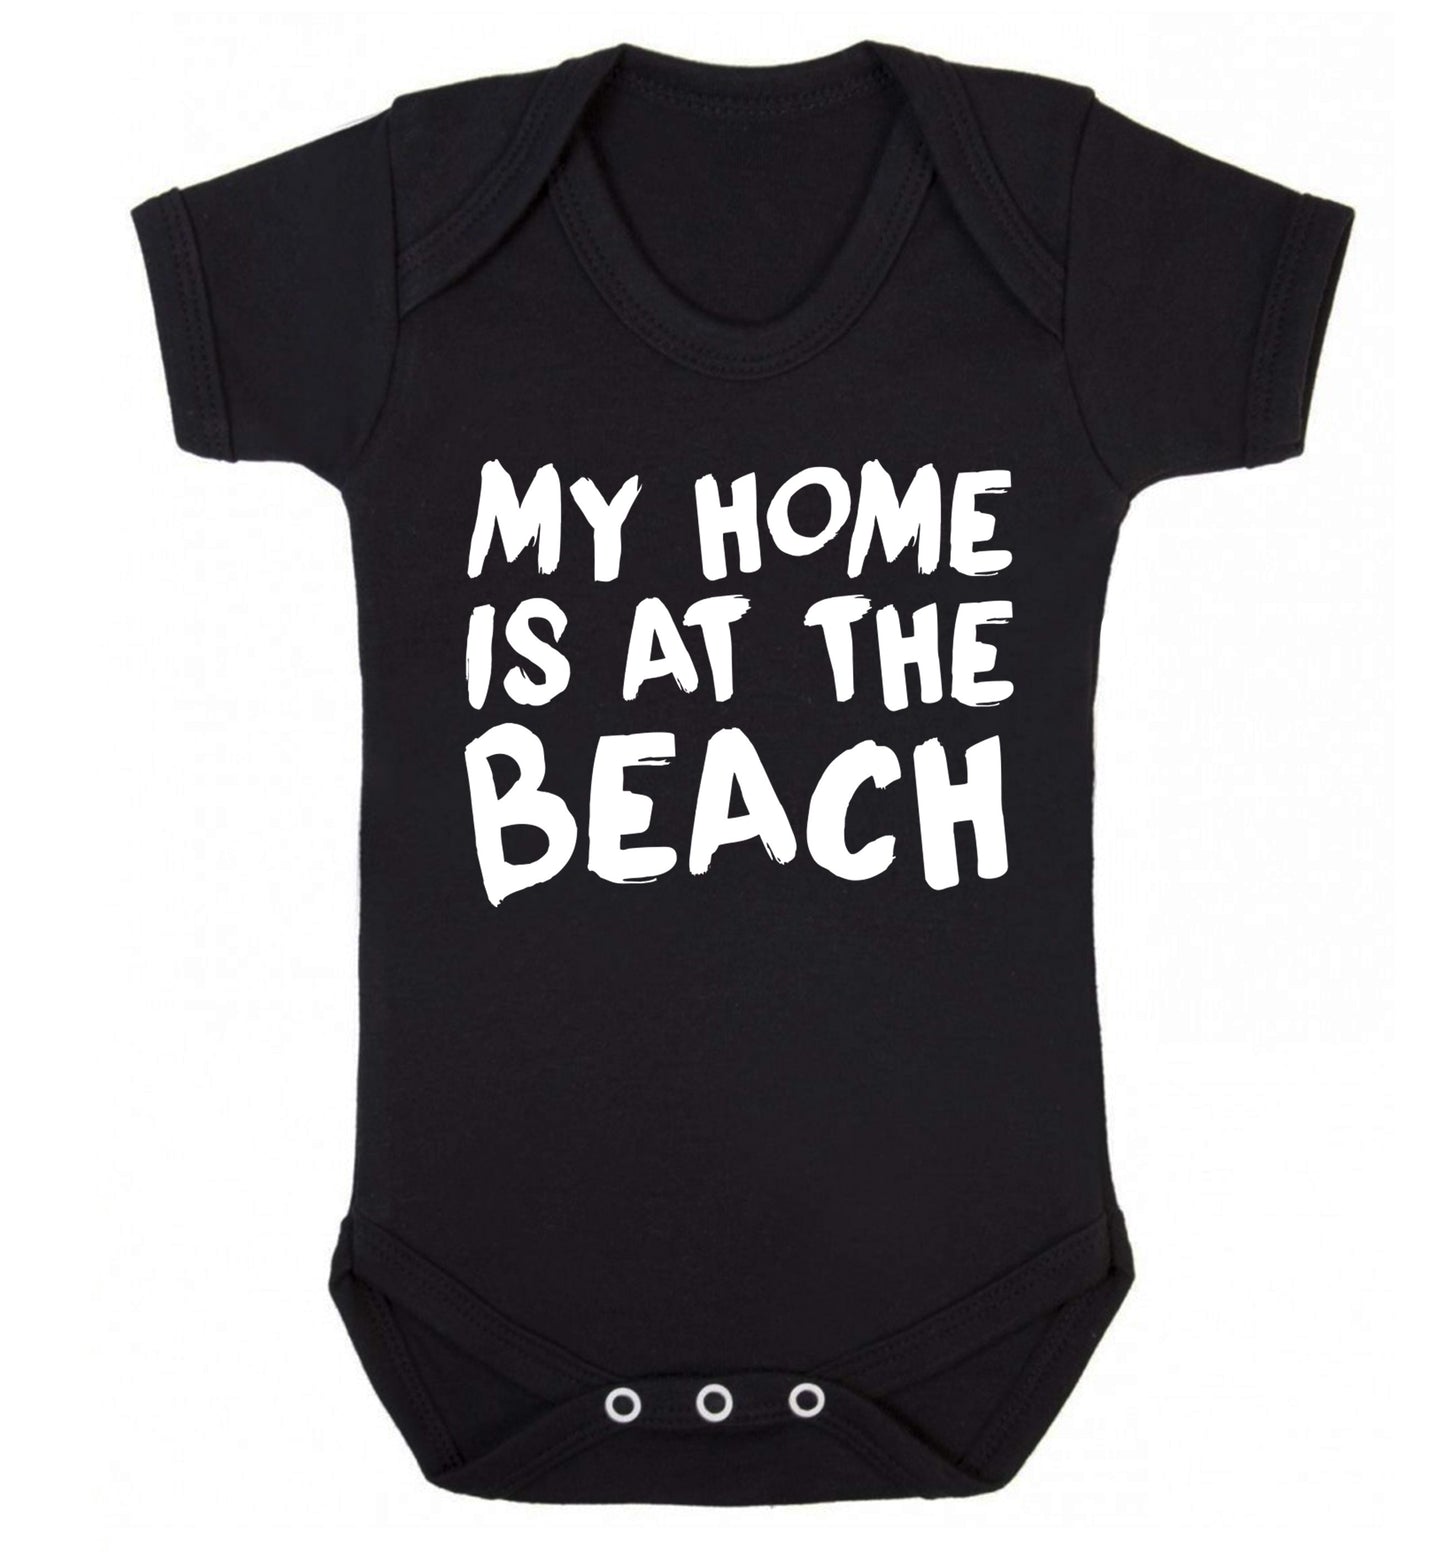 My home is at the beach Baby Vest black 18-24 months